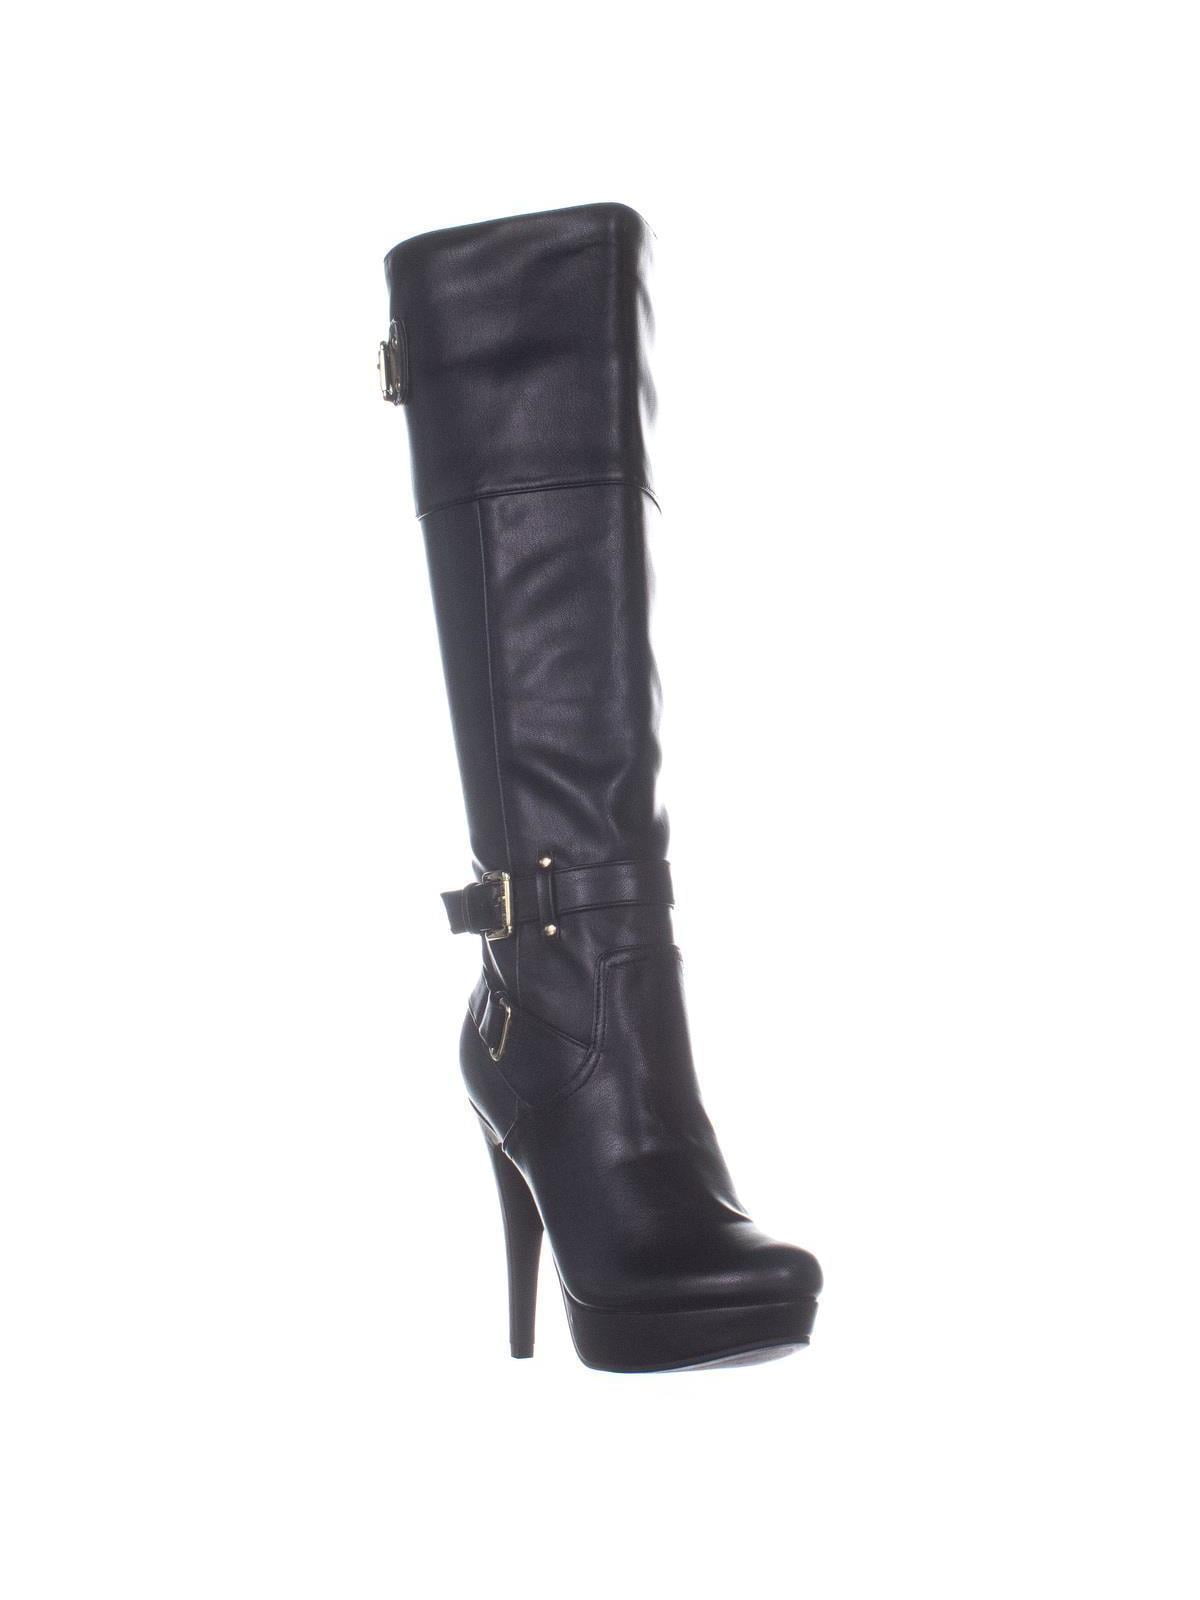 knee high guess boots